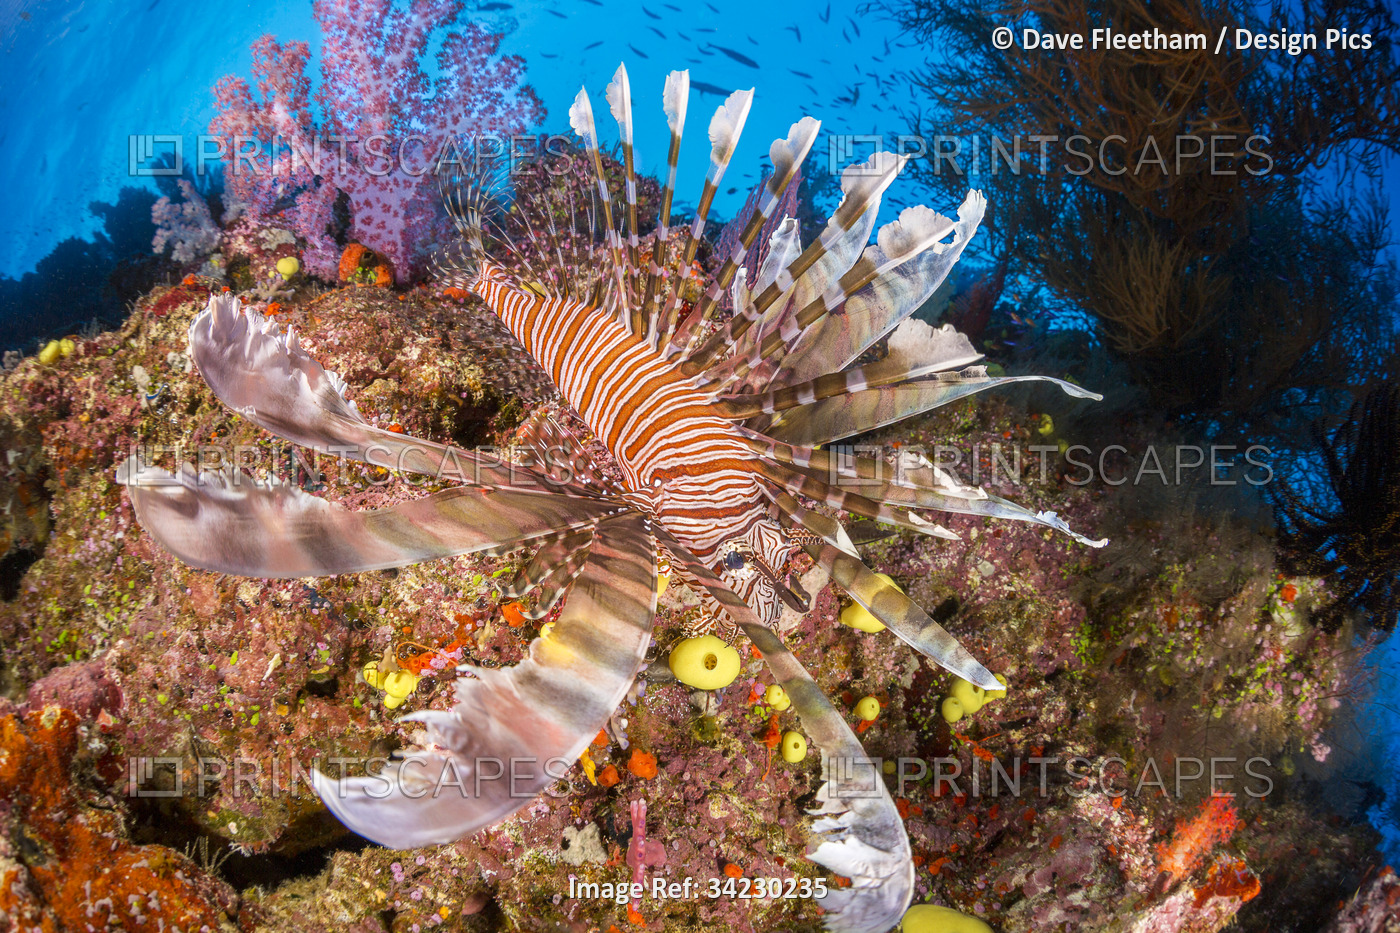 Llionfish (Pterois volitans) and alcyonarian soft coral; Fiji